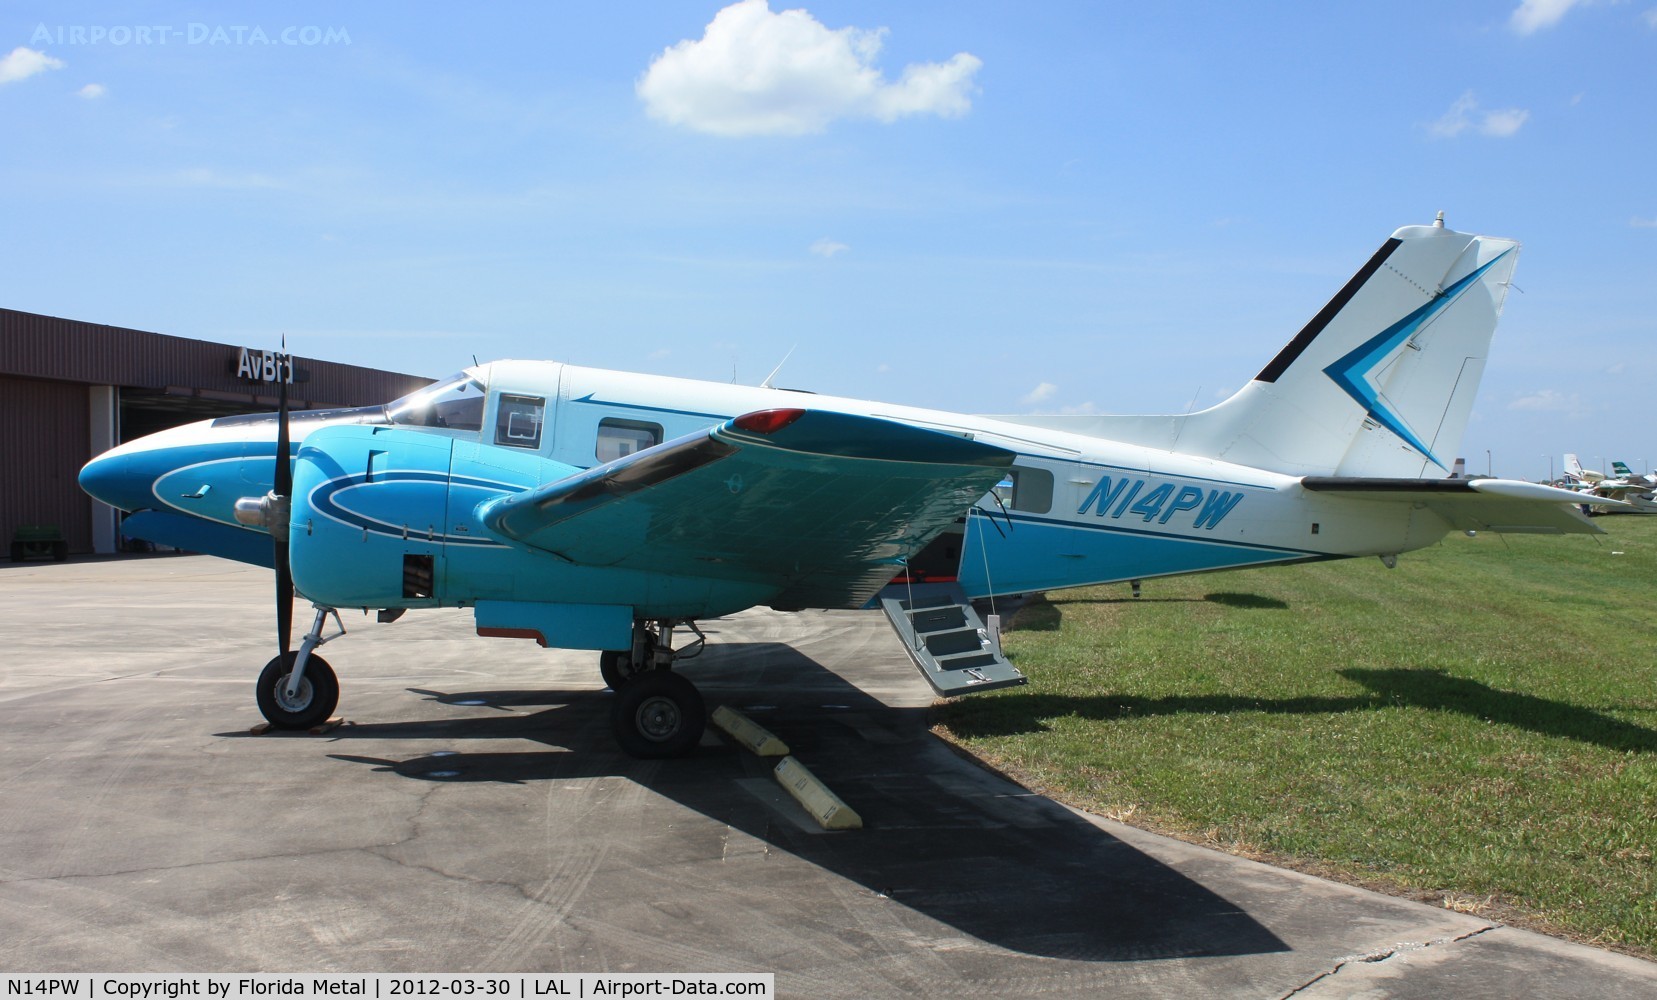 N14PW, 1951 Beech C-45H Expeditor C/N AF-314, Rare single tail Beech 18/C-45 with a nose wheel also